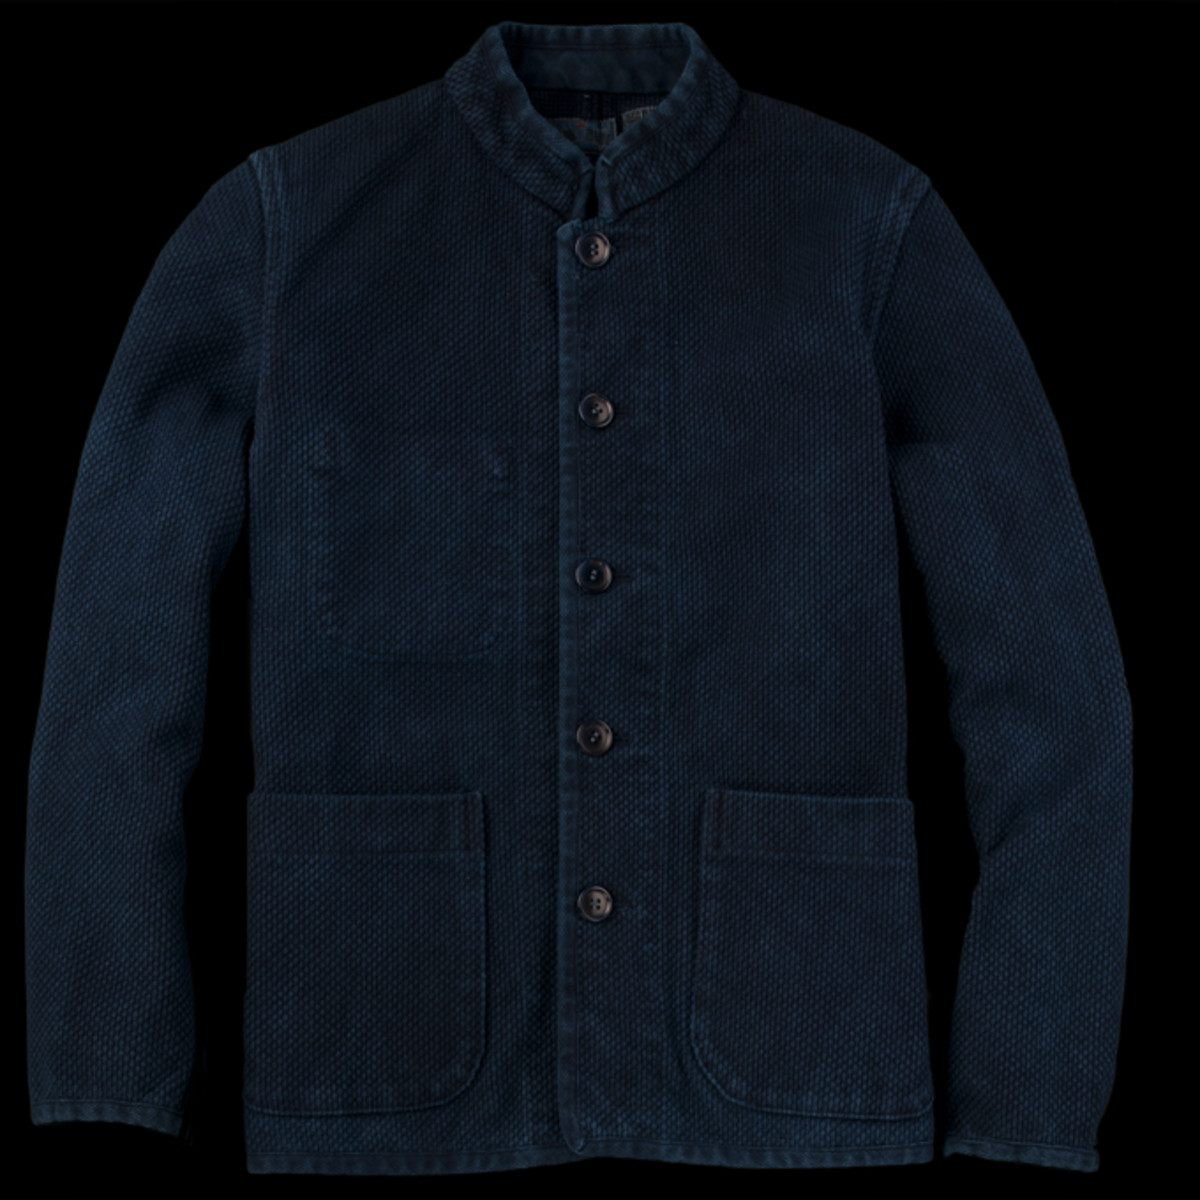 A Sashiko Jacket That Will Be Amazing In 10 Years (If You Can Wait That ...